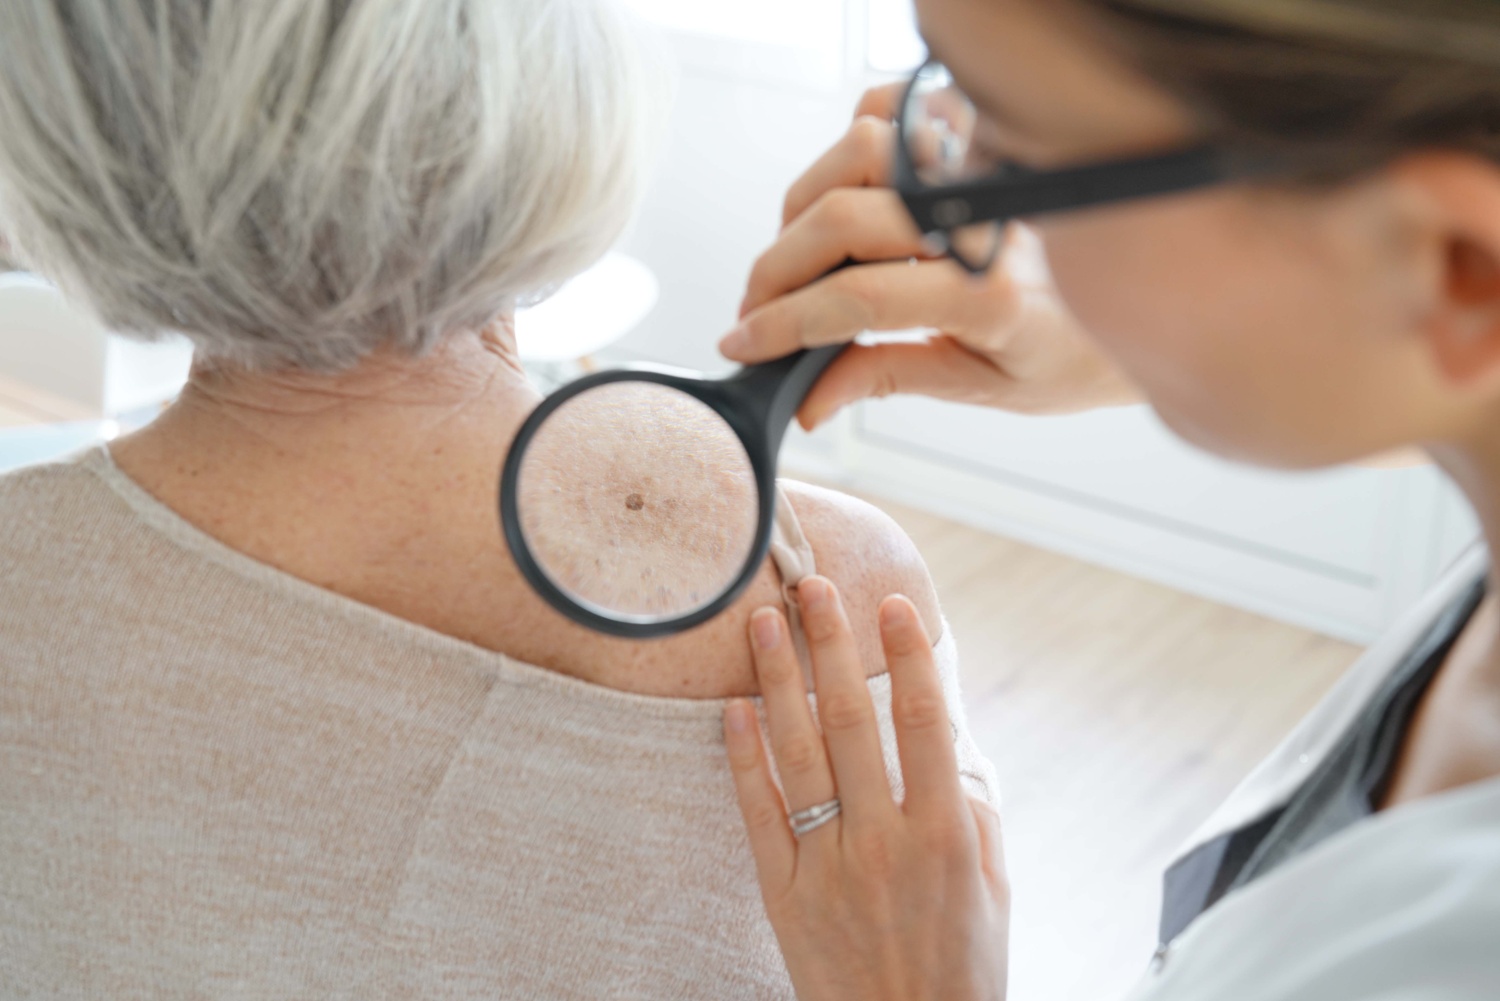 Insights on Warts, Moles, and Skin Tags from a Dermatologist